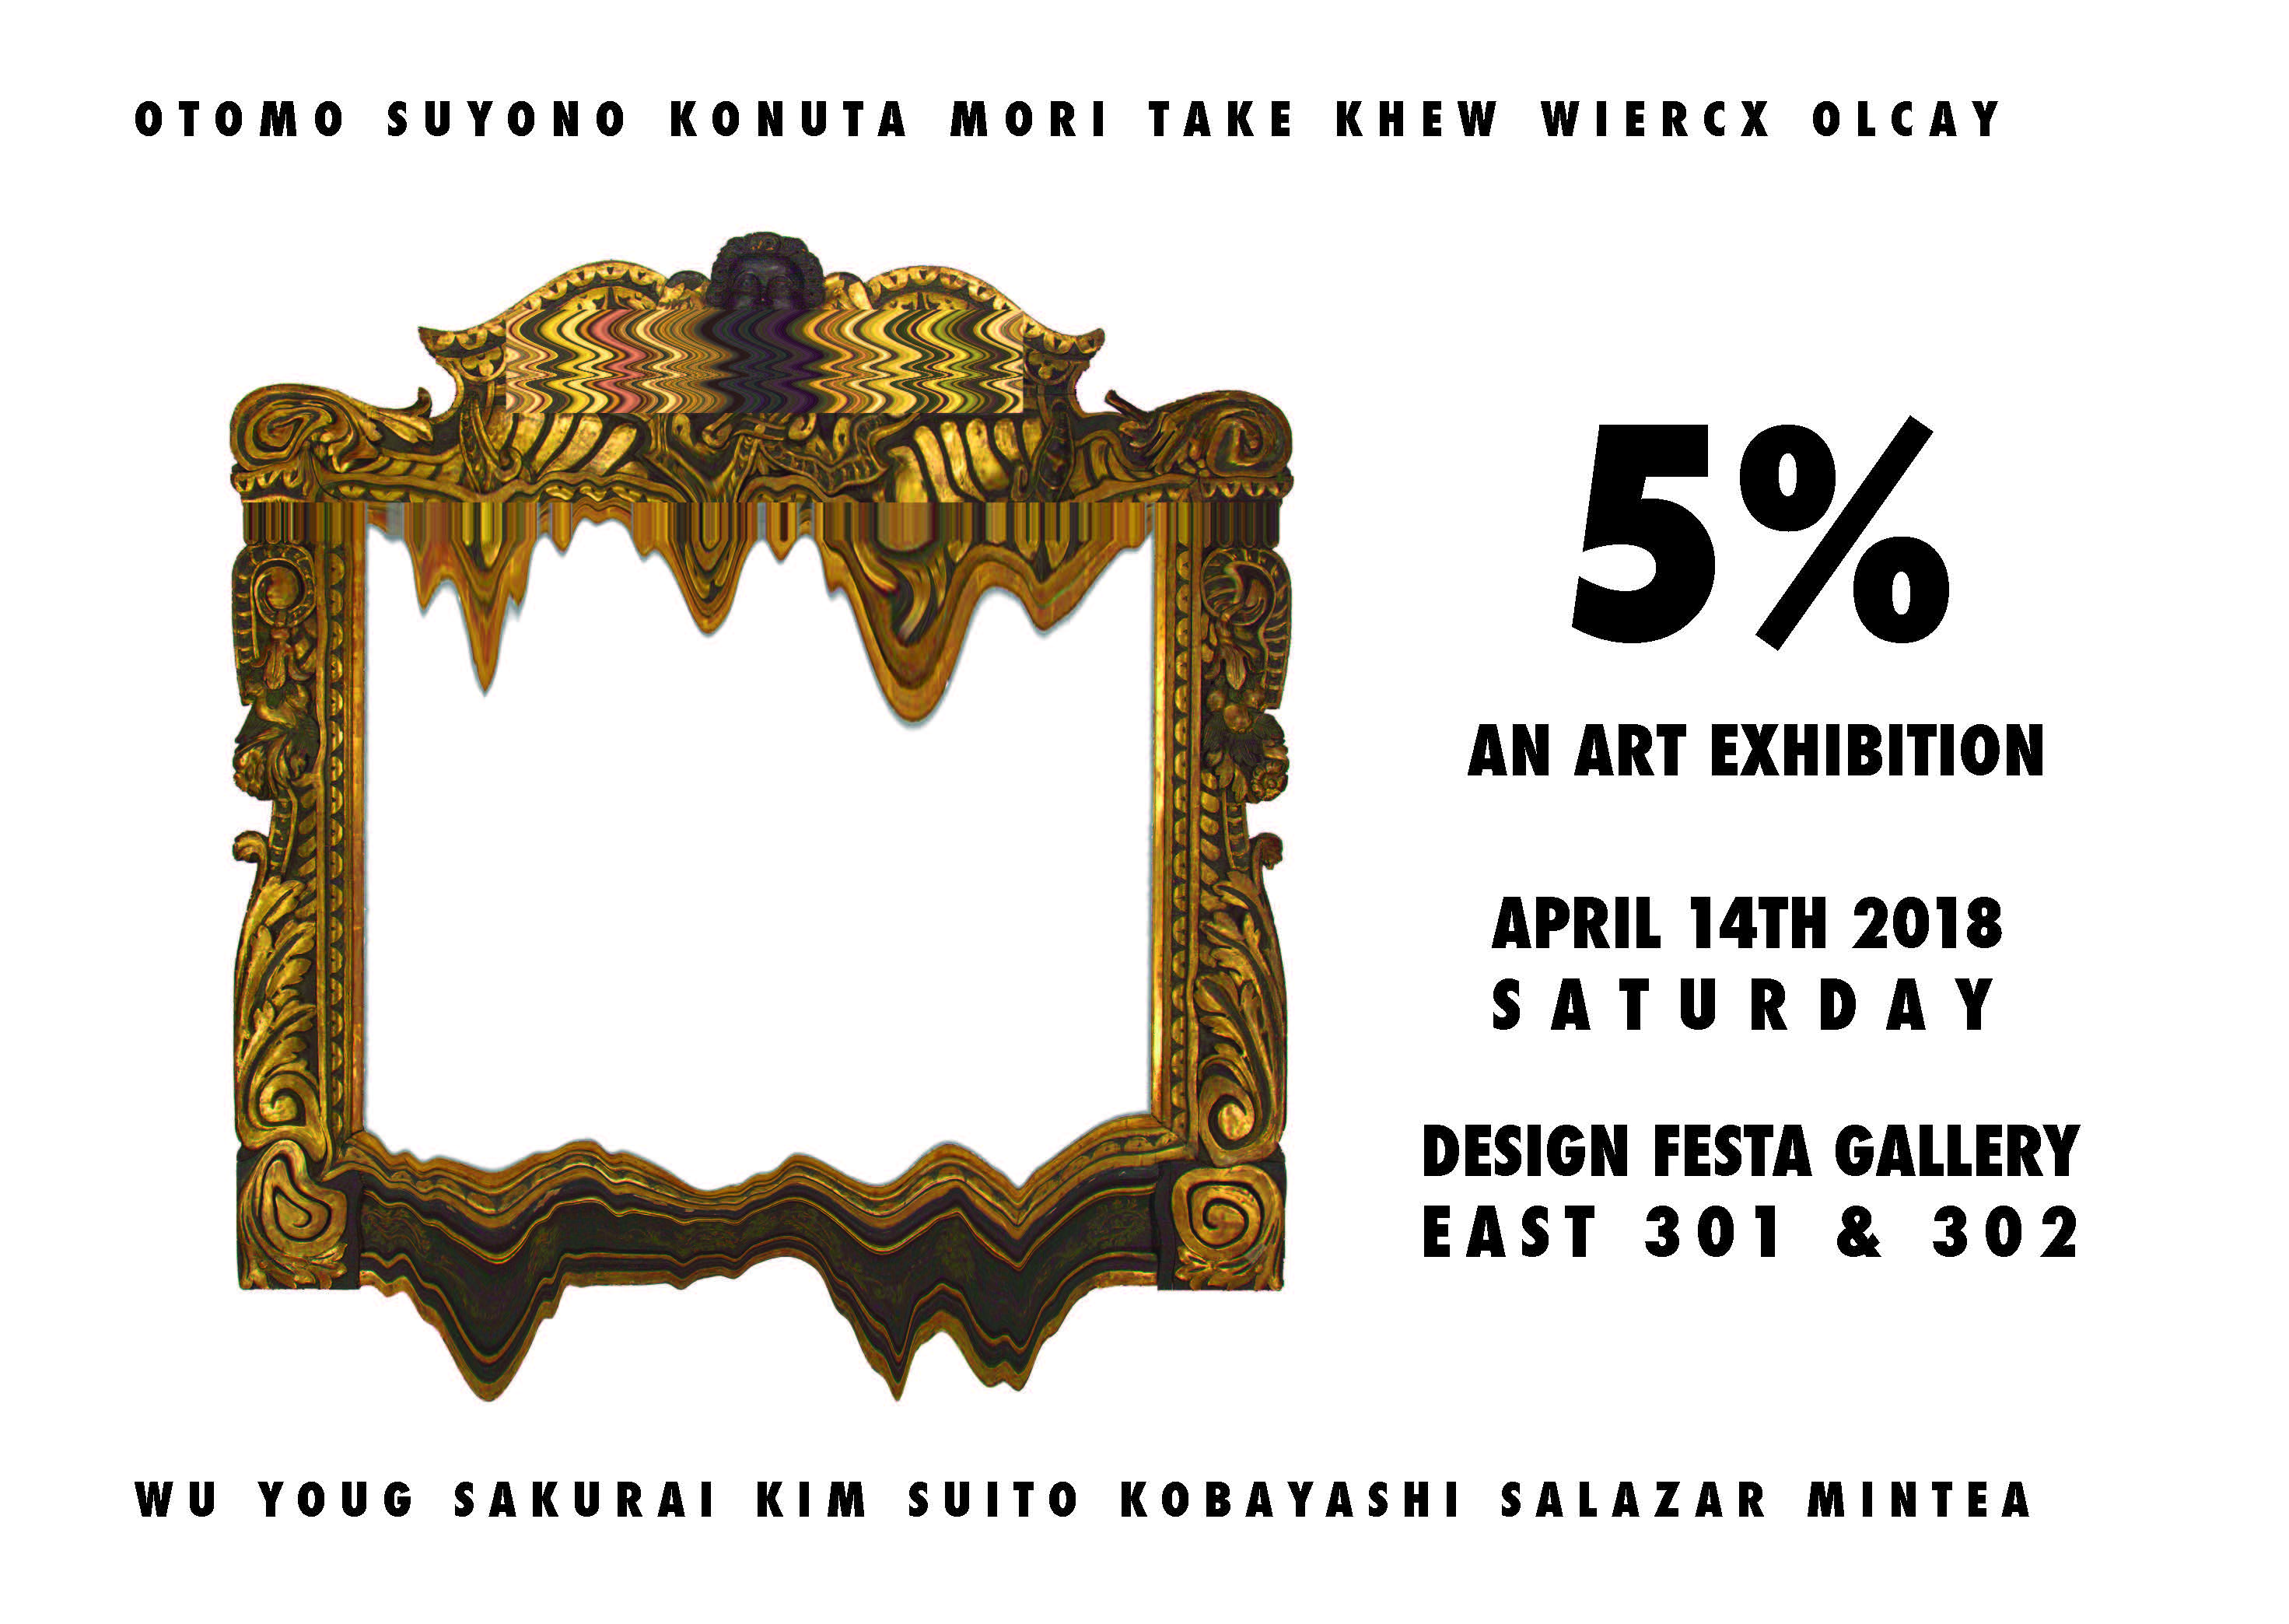 Flyer image of 5% art exhibition